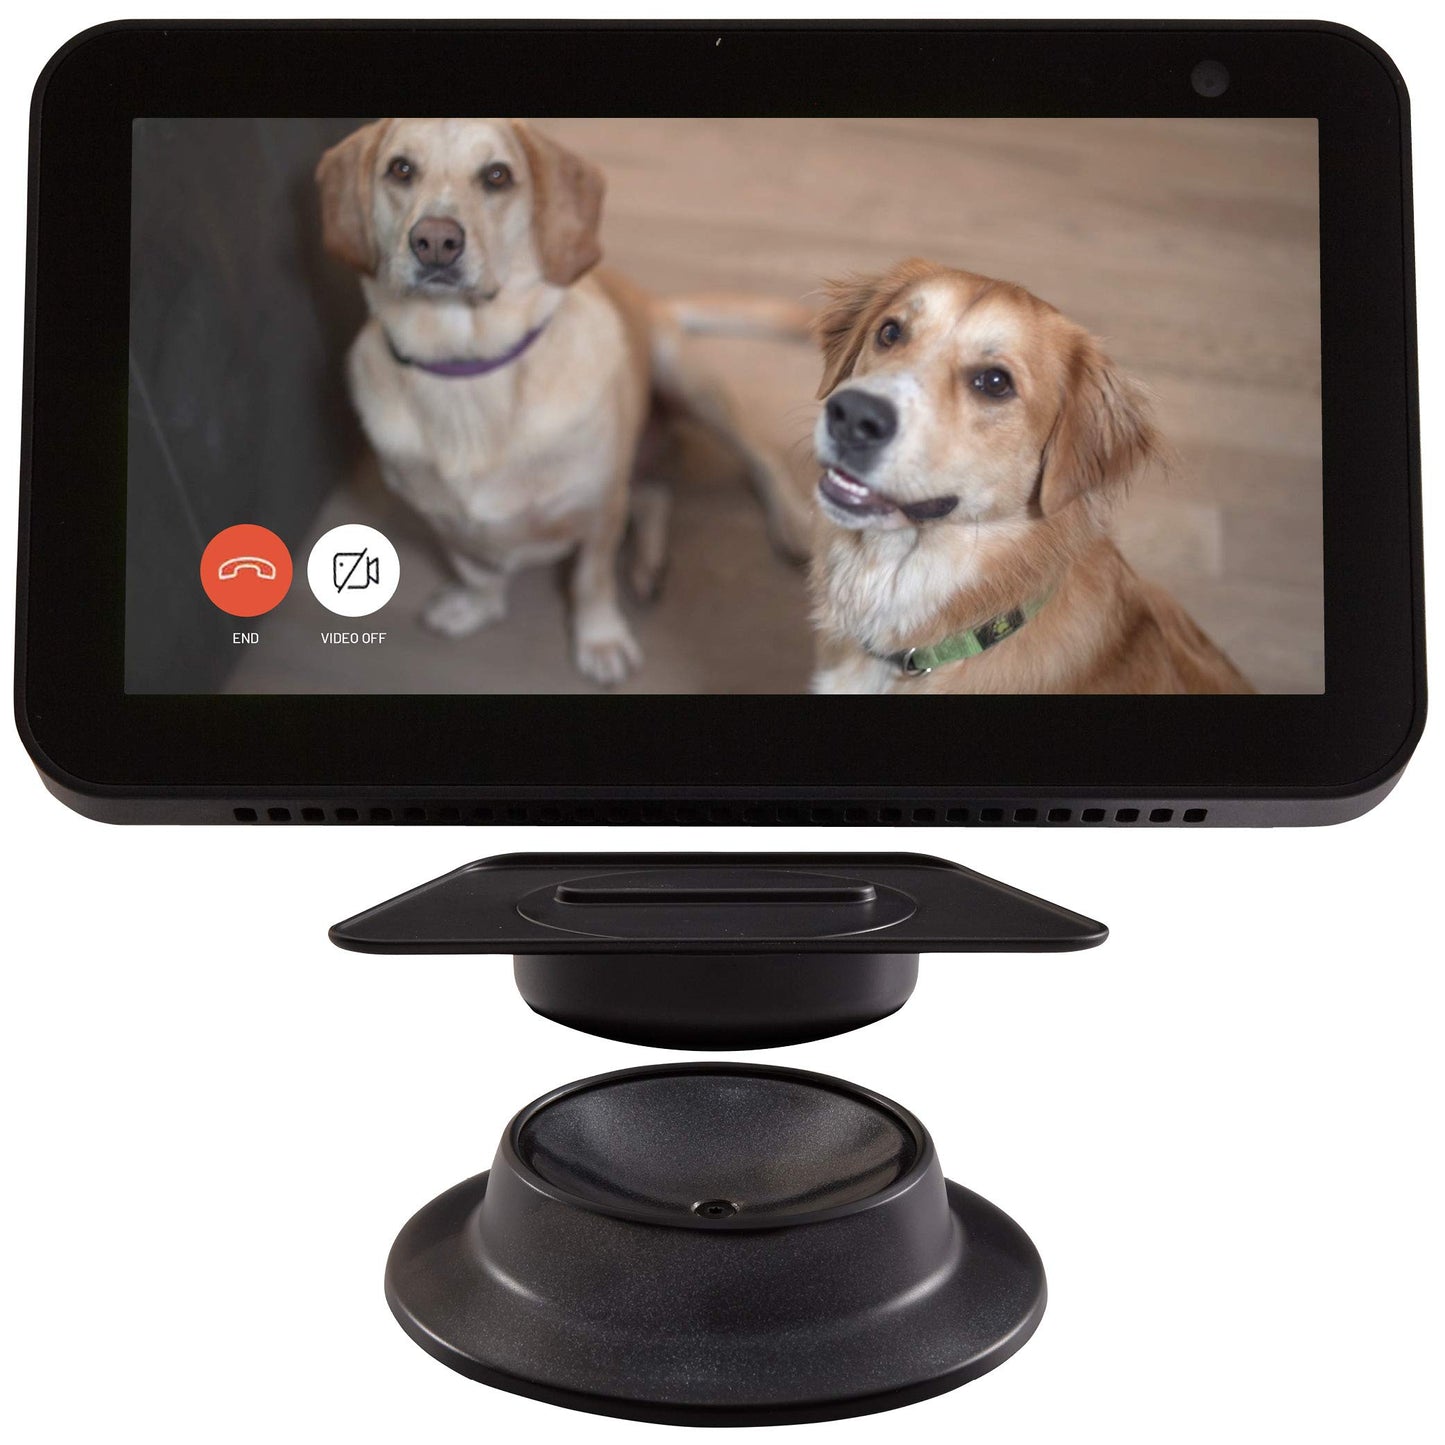 Made for Amazon Tilt + Swivel Stand in Black, for the Echo Show 8